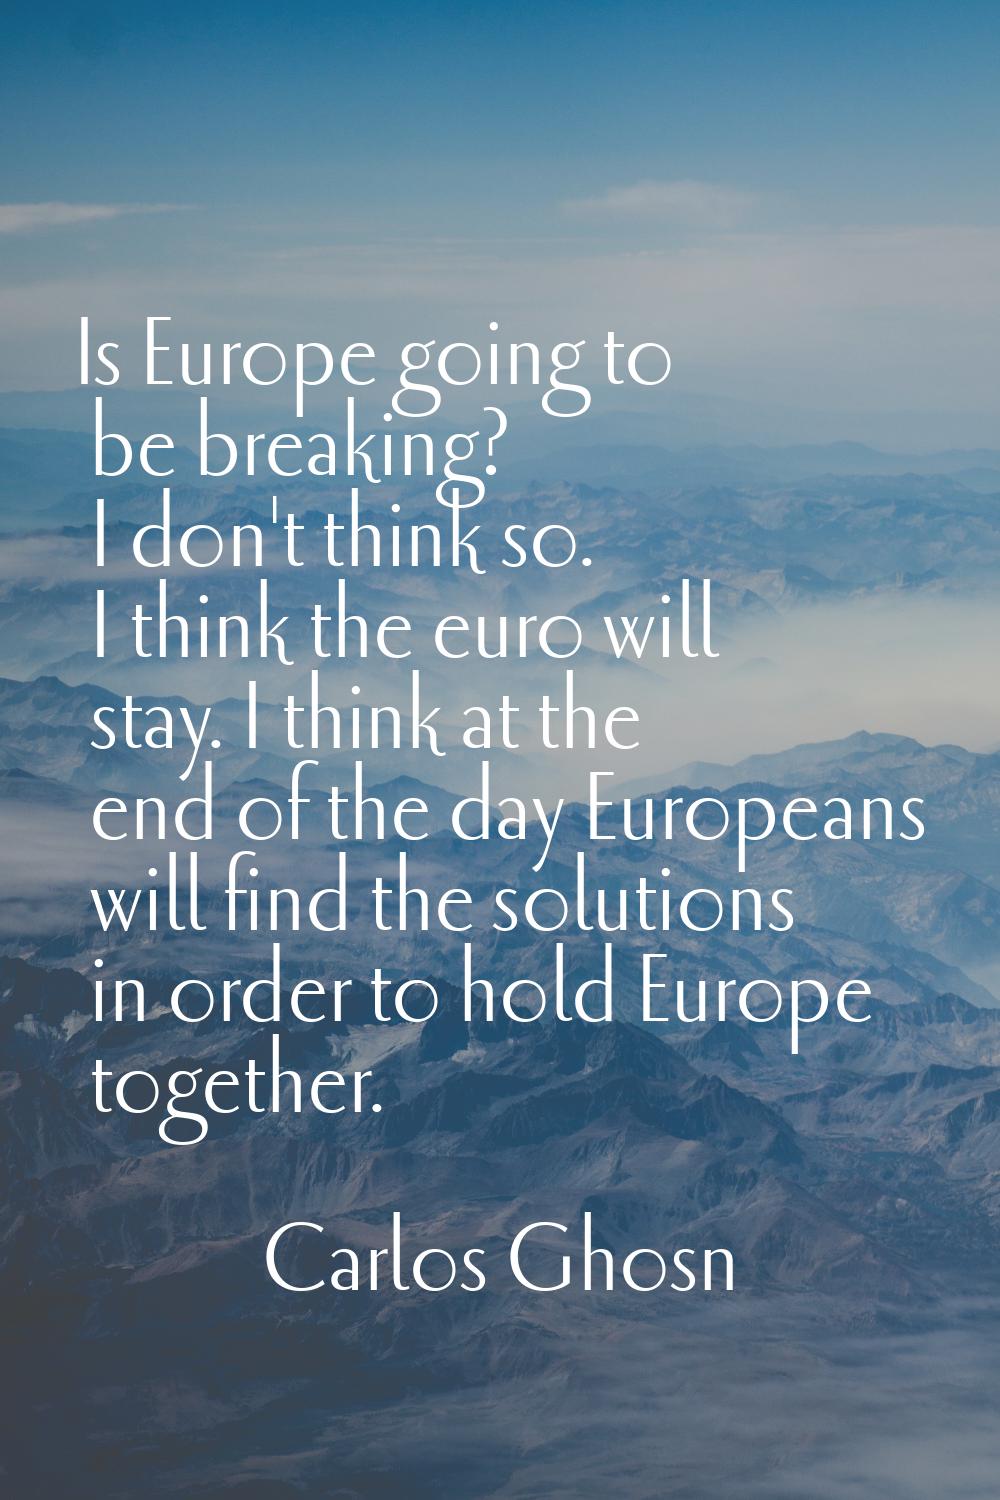 Is Europe going to be breaking? I don't think so. I think the euro will stay. I think at the end of